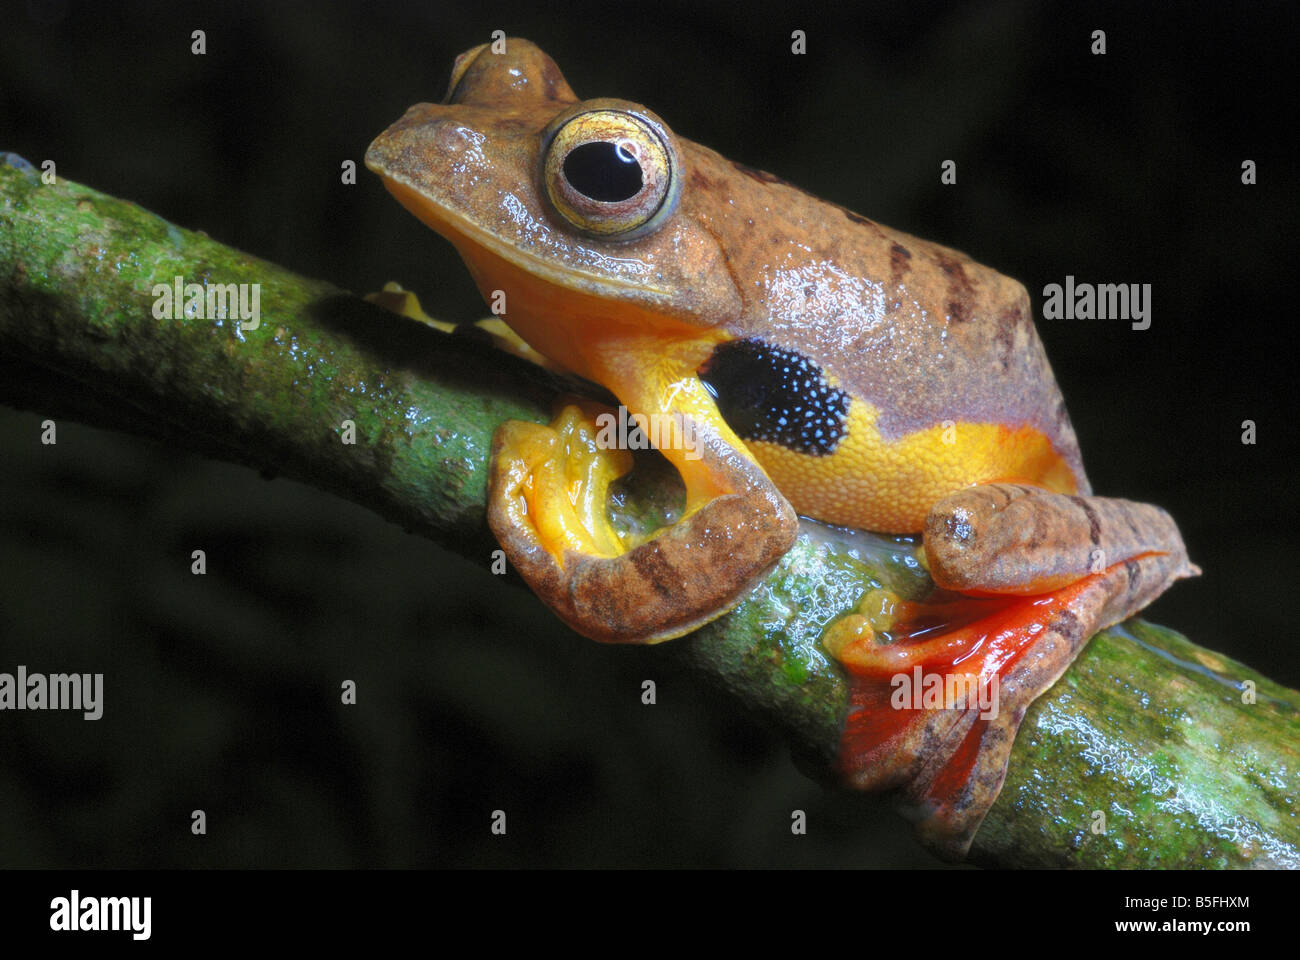 Rhacophorus cf rhodogaster. A species of Gliding frog. Stock Photo